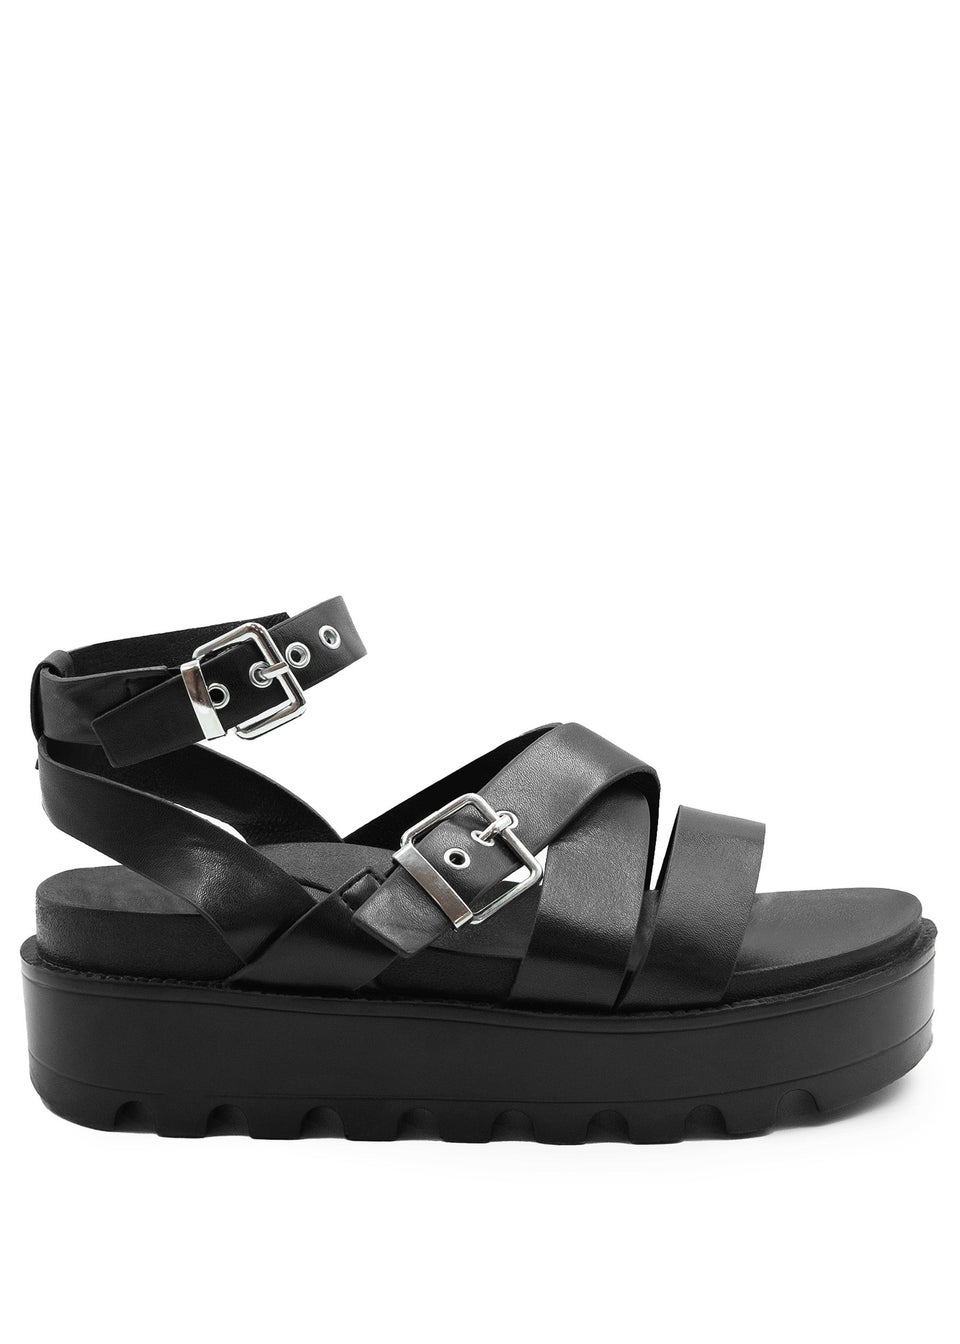 Where's That From Black Pu Layla Buckle Strap Platform Sandals